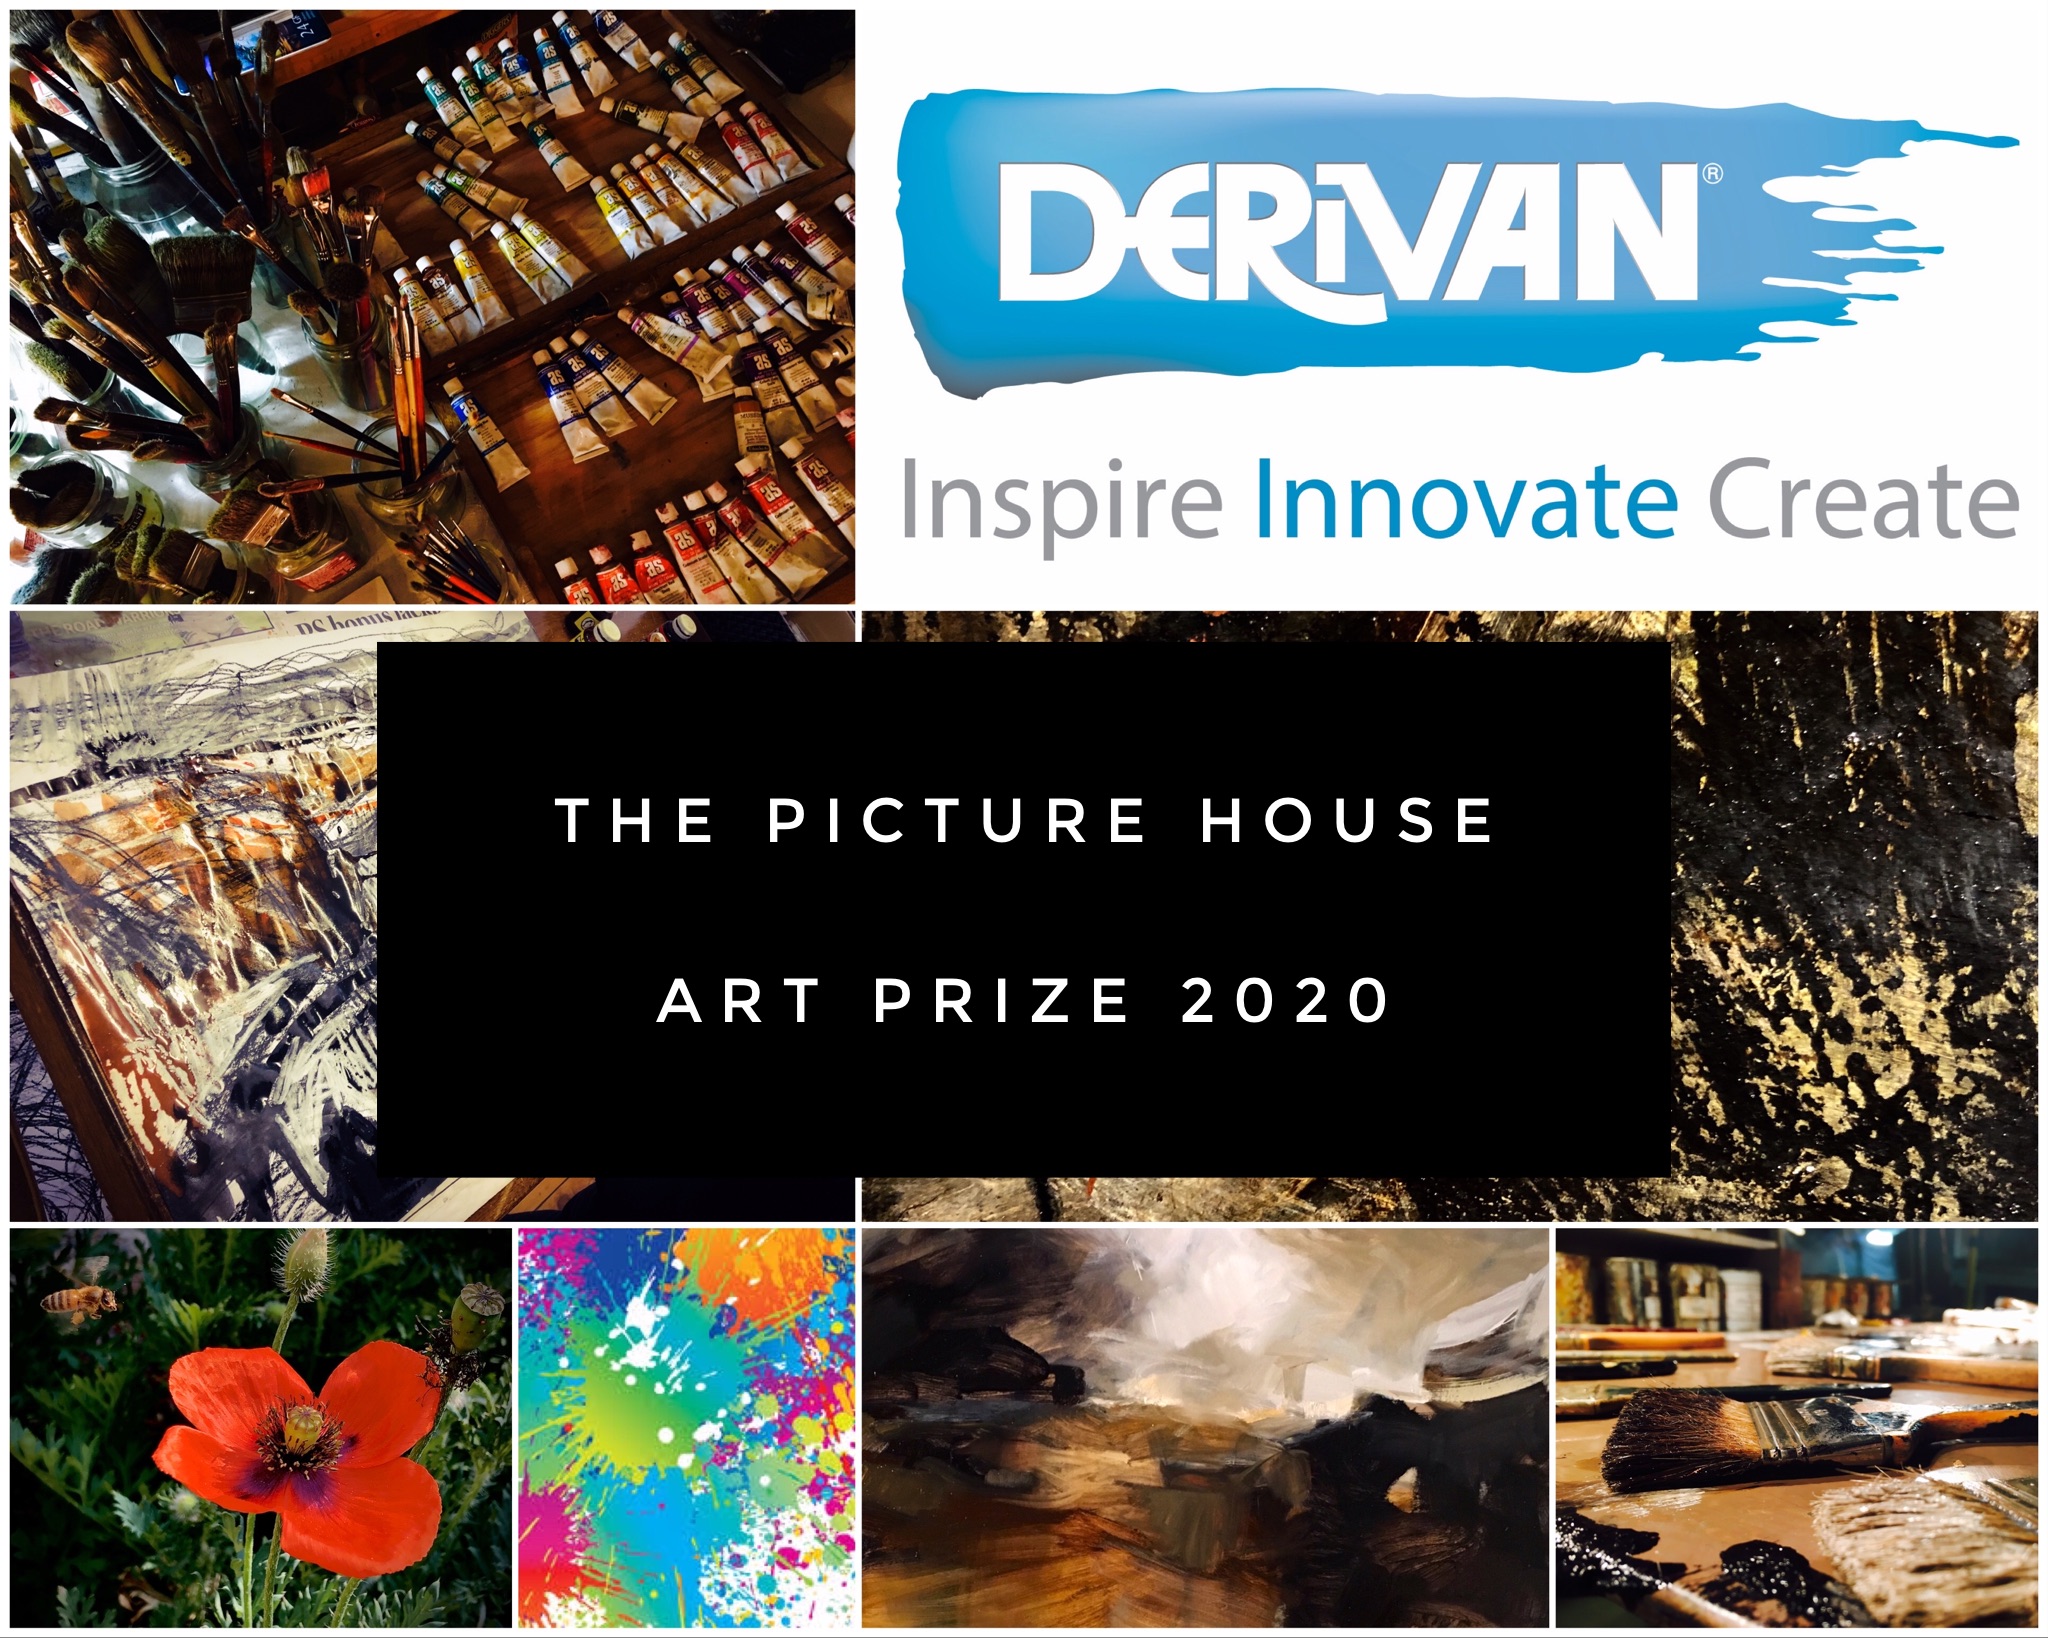 The Picture House Art Prize